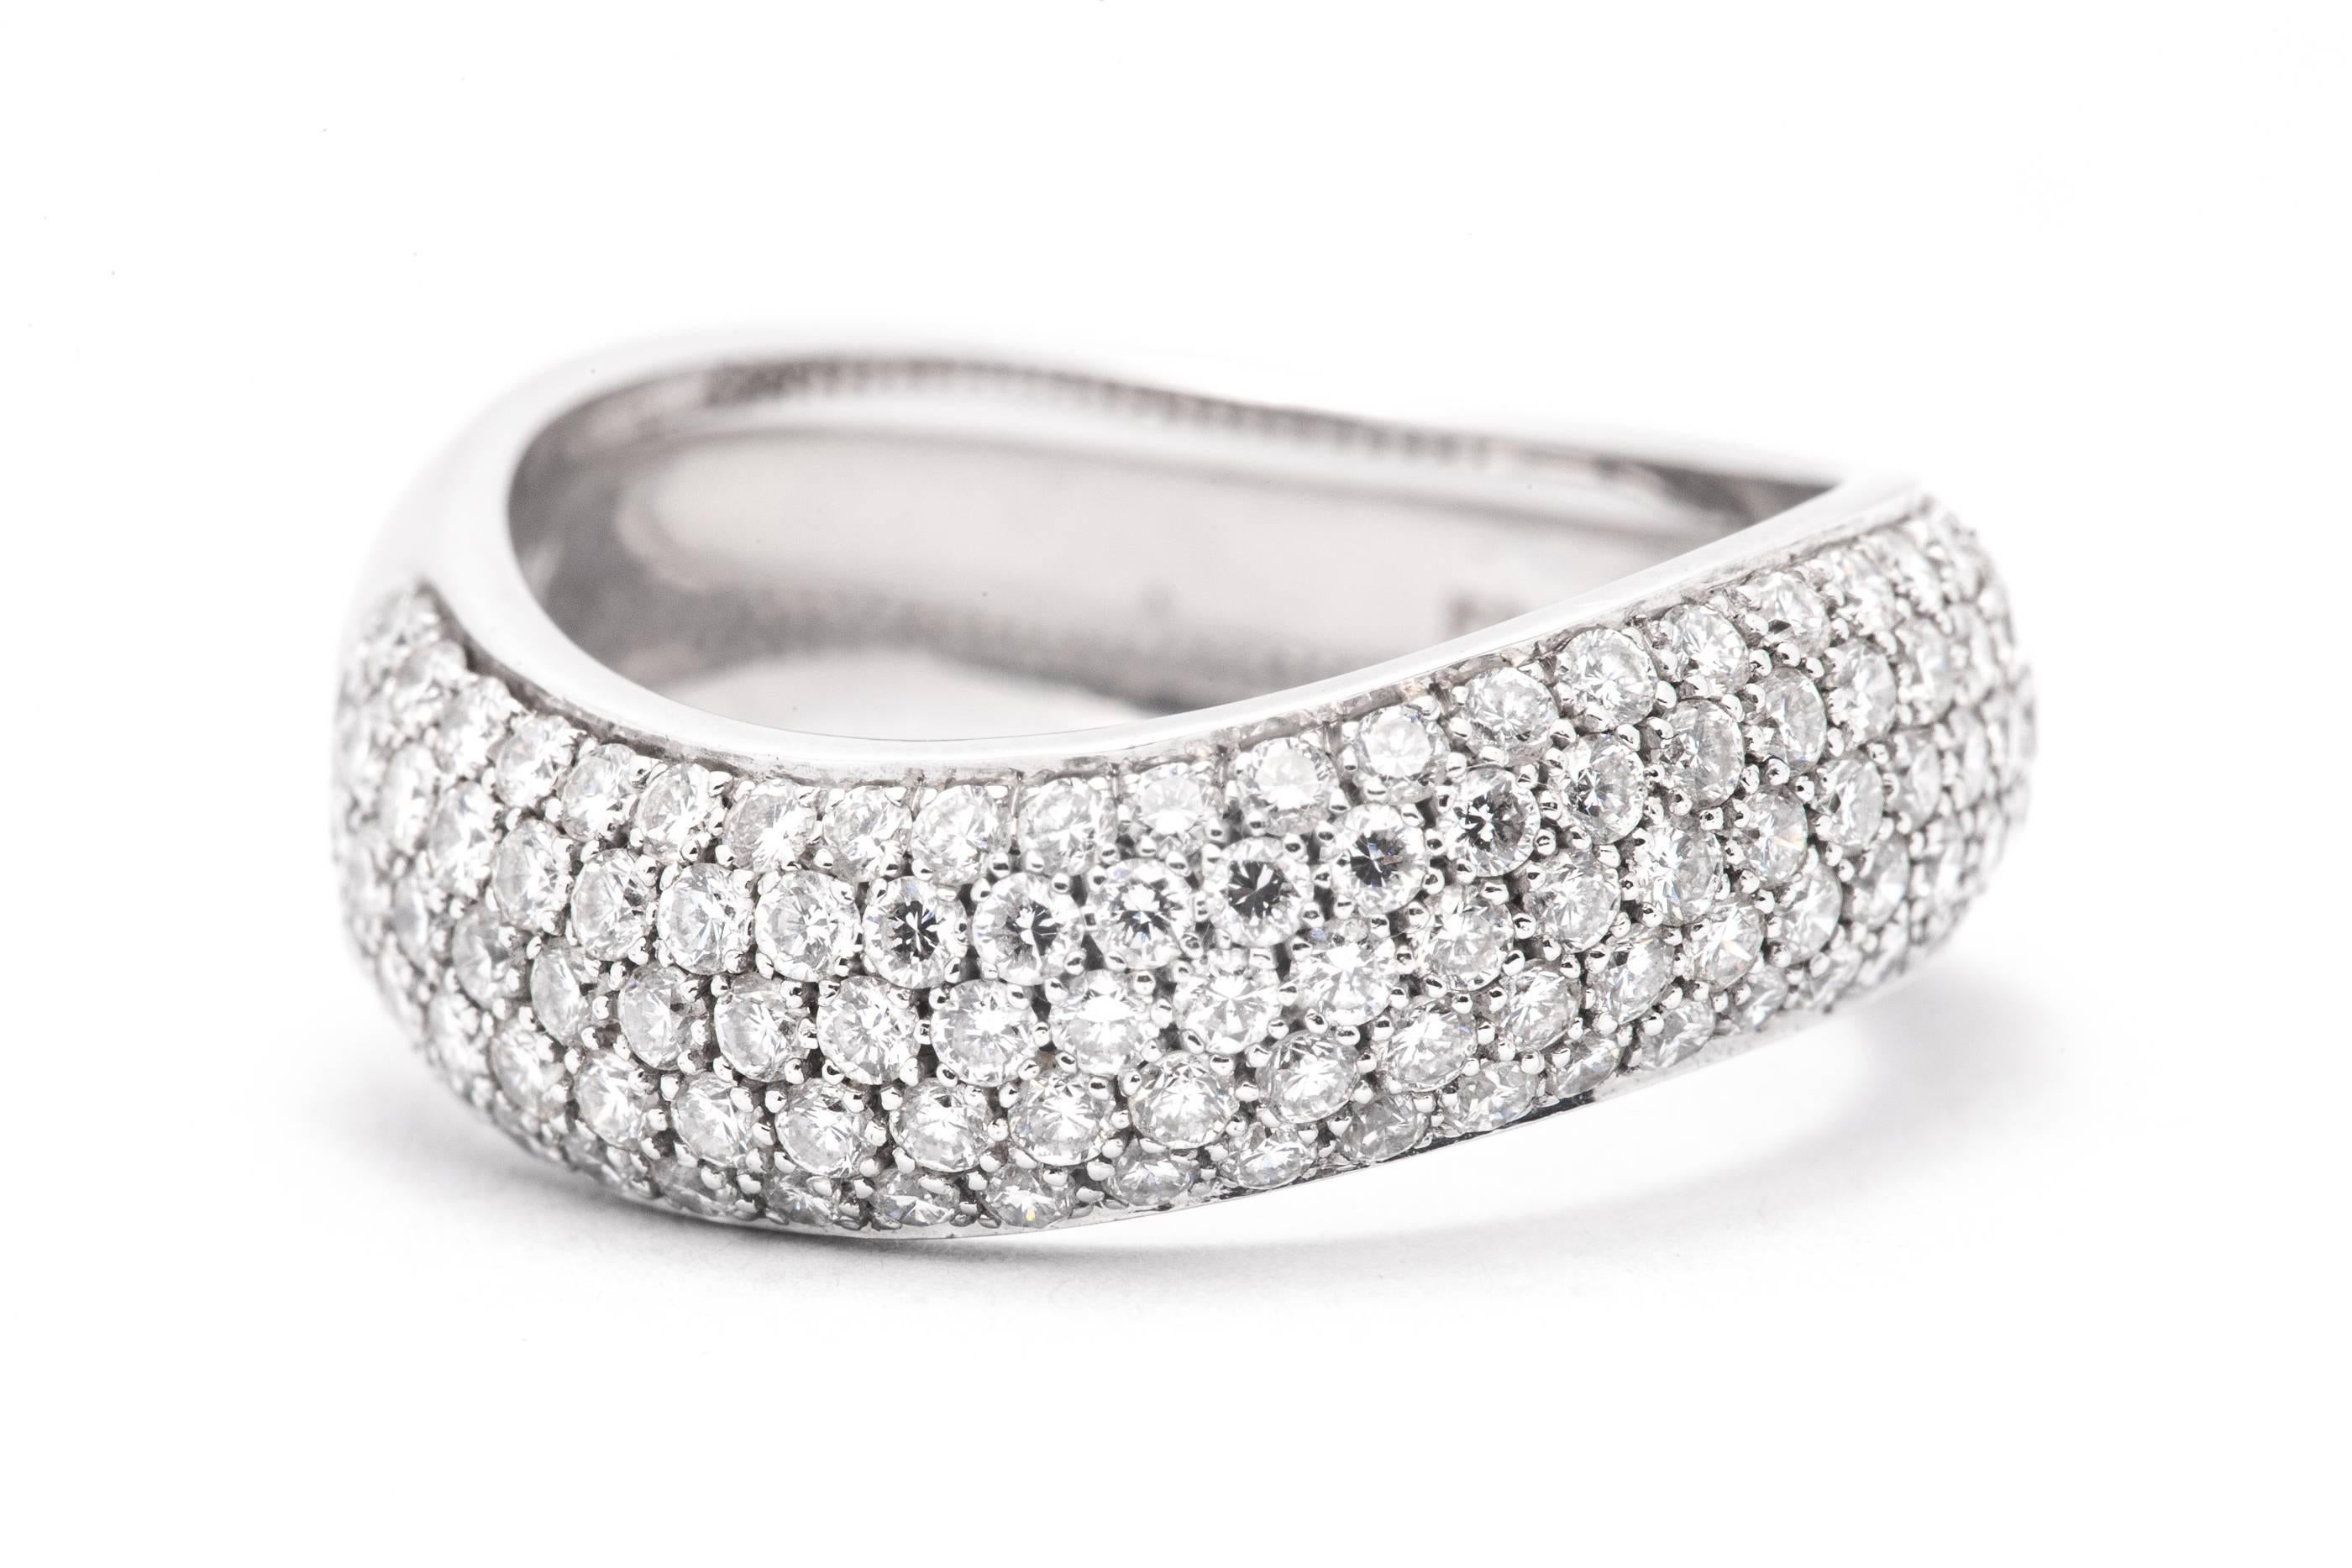 A wave shaped diamond ring in 18 karat white gold.  Pave set with a total of one hundred twenty nine brilliant cut diamonds, this ring provides incredible sparkle and beauty.  

All grading as superb VS clarity, and G color the diamonds are all